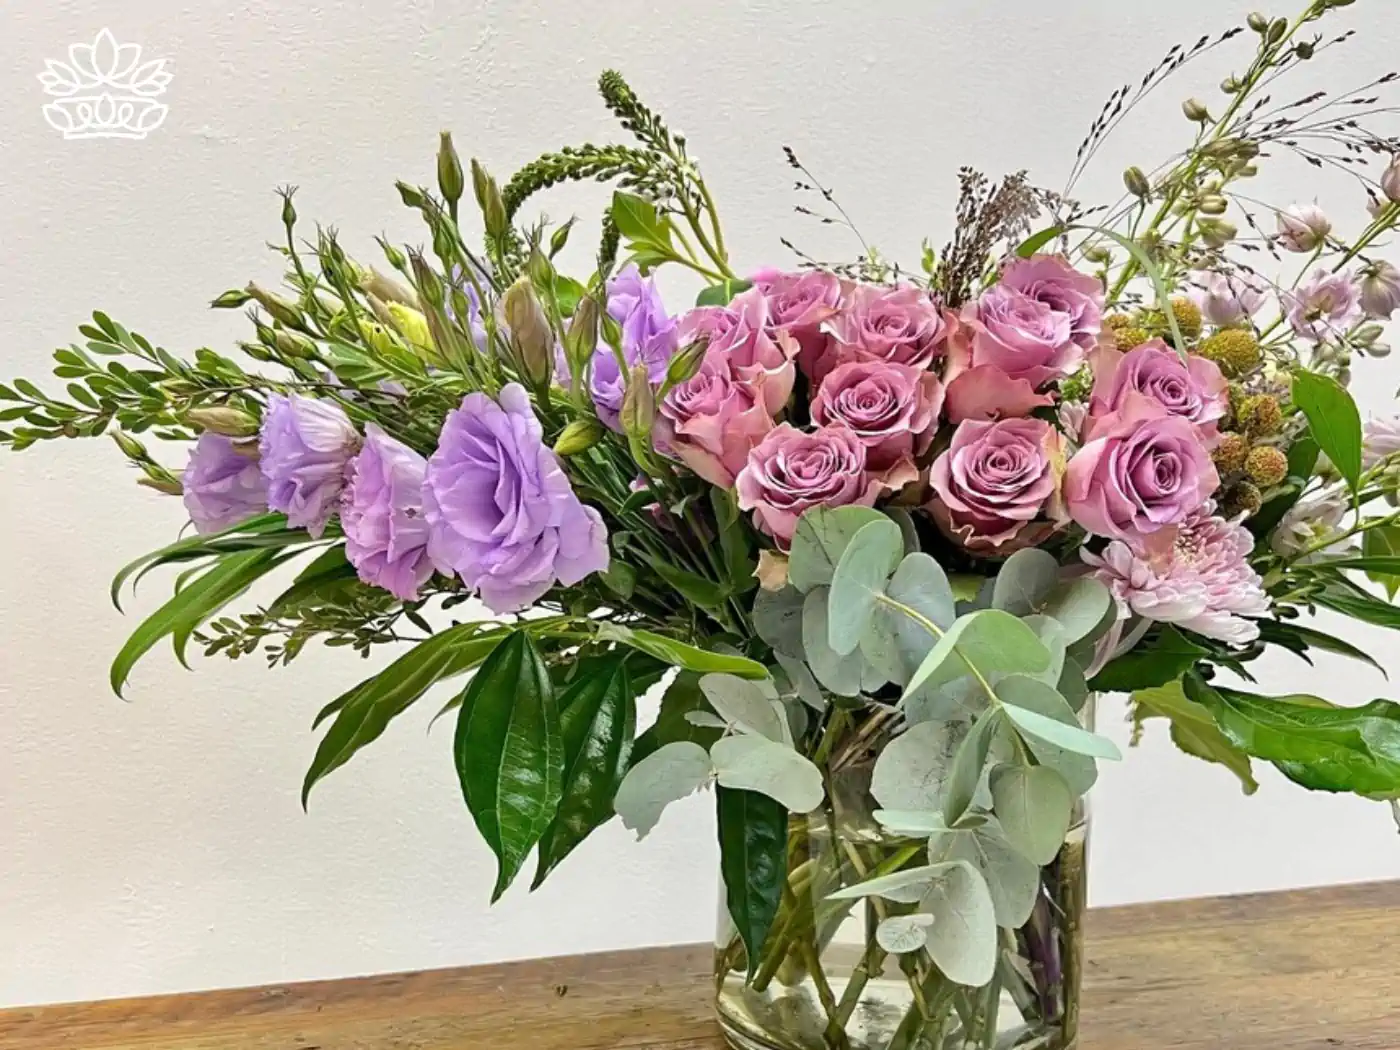 Elegant flower arrangement in a glass vase featuring soft pink roses, lavender lisianthus, and assorted greenery, exuding sophistication and charm. Fabulous Flowers and Gifts: Flower Arrangements Under R500, Delivered with Heart.